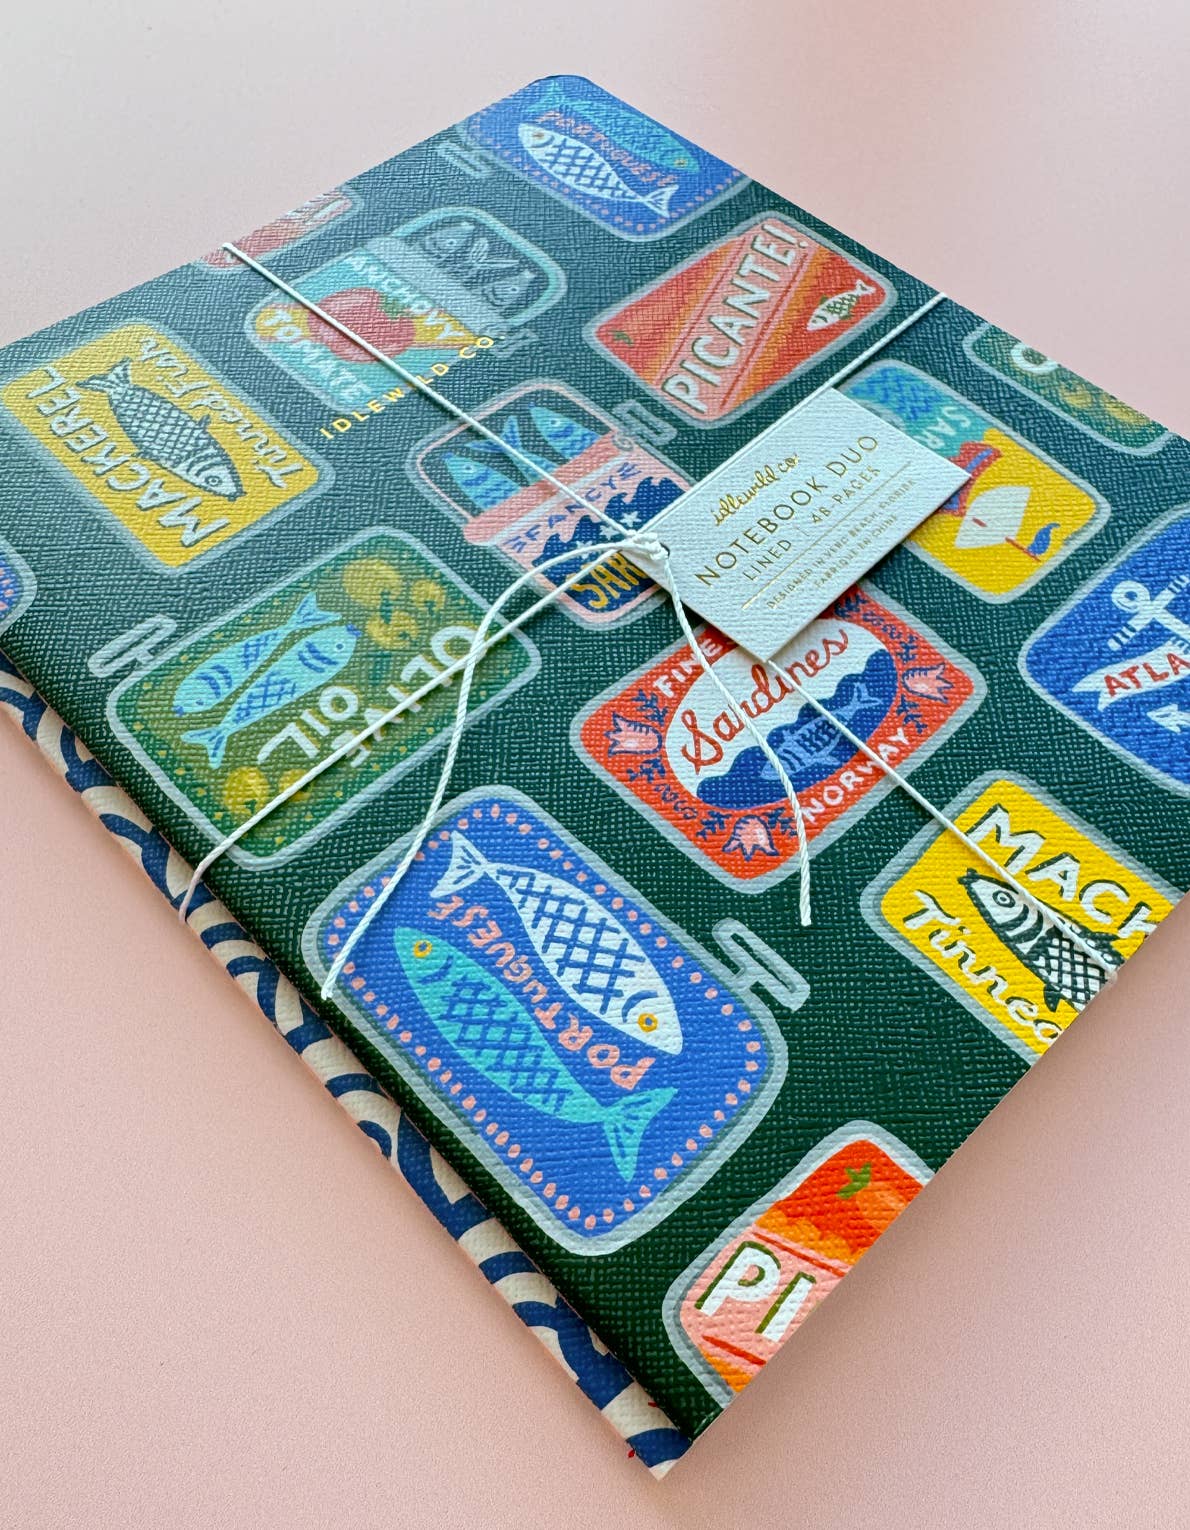 Idlewild Co. - Tinned Fish Notebook Duo